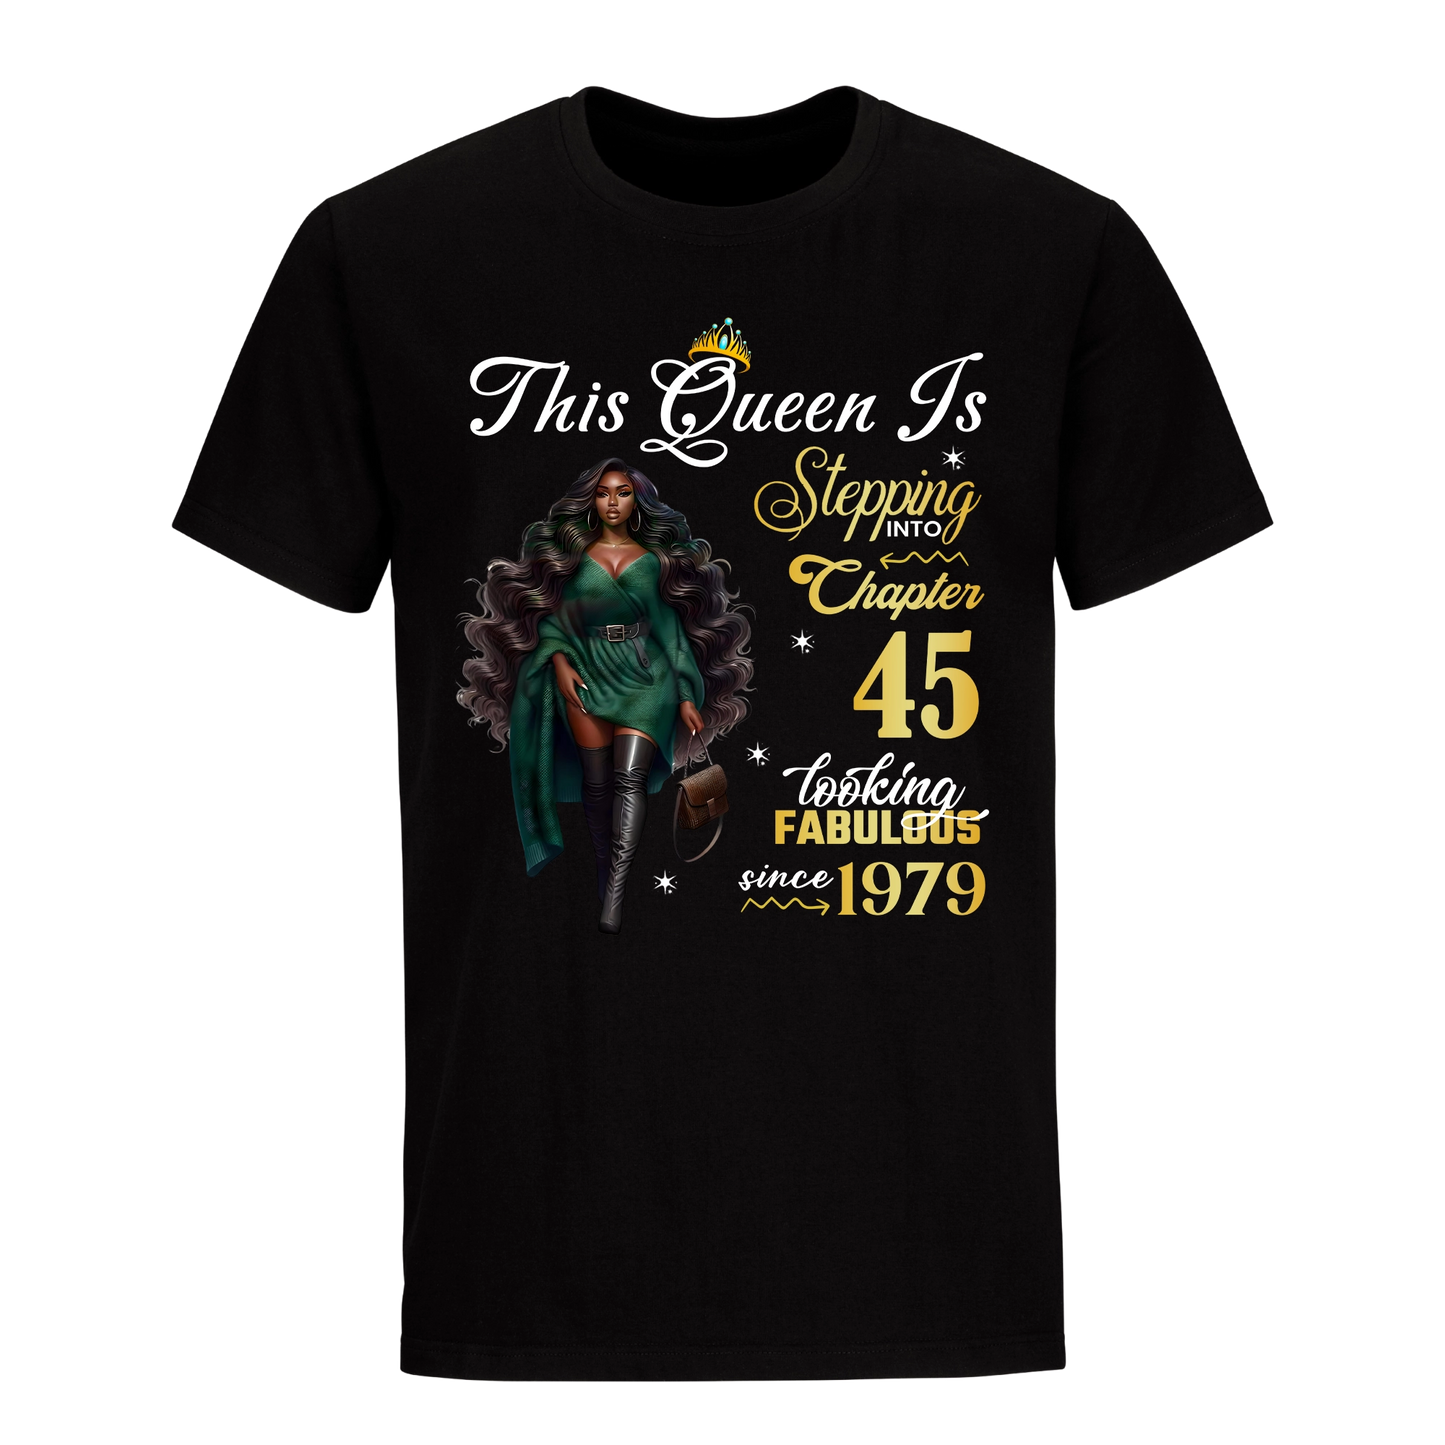 THIS QUEEN IS LOOKING FABULOUS 45 UNISEX SHIRT